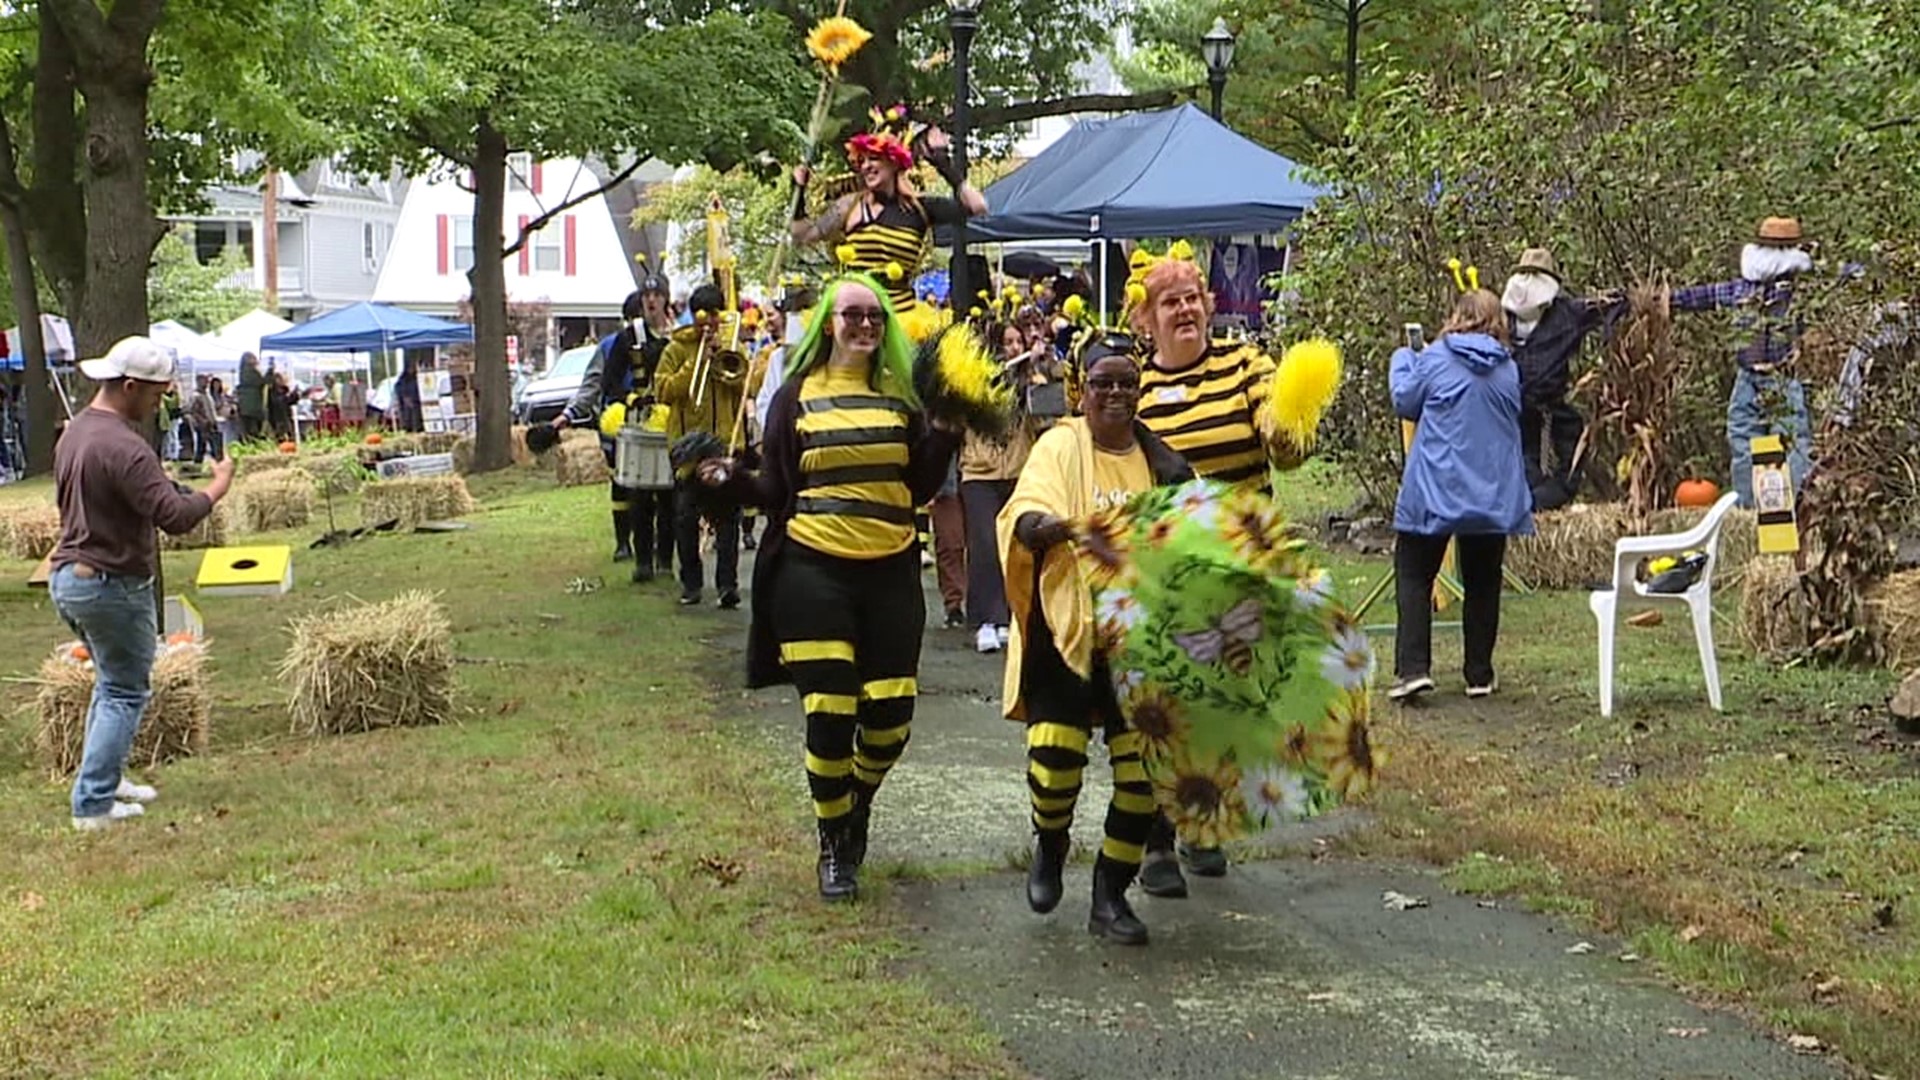 The fall festival celebrating honeybee and harvest season was held at the park in Scranton Sunday afternoon.